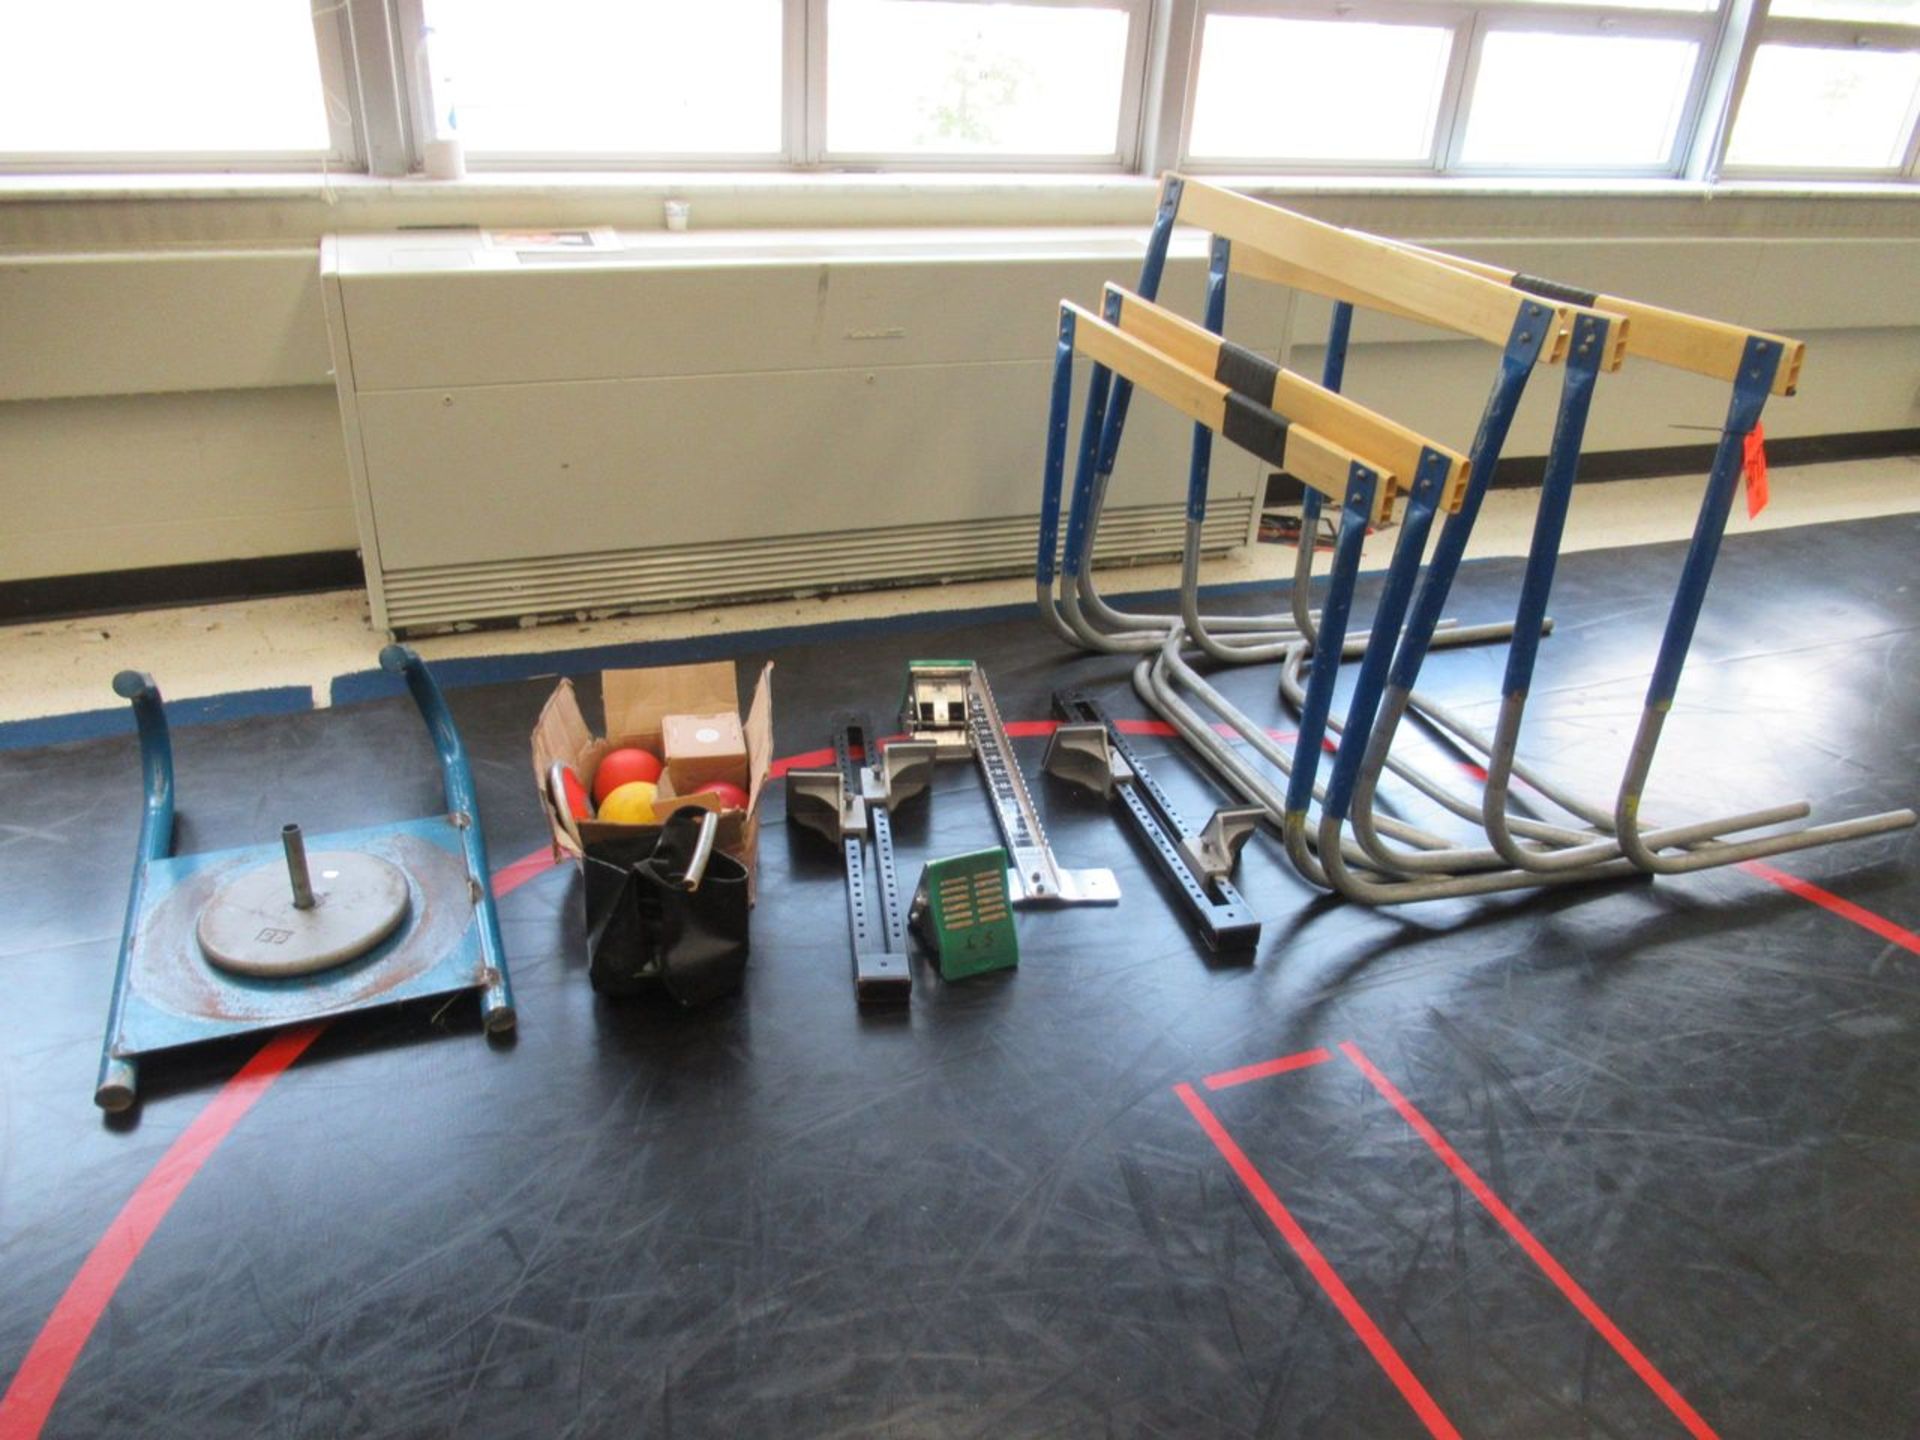 Lot - (5) Hurdles, (3) Starting Blocks, Weighed Balls and Disc (Room 110)